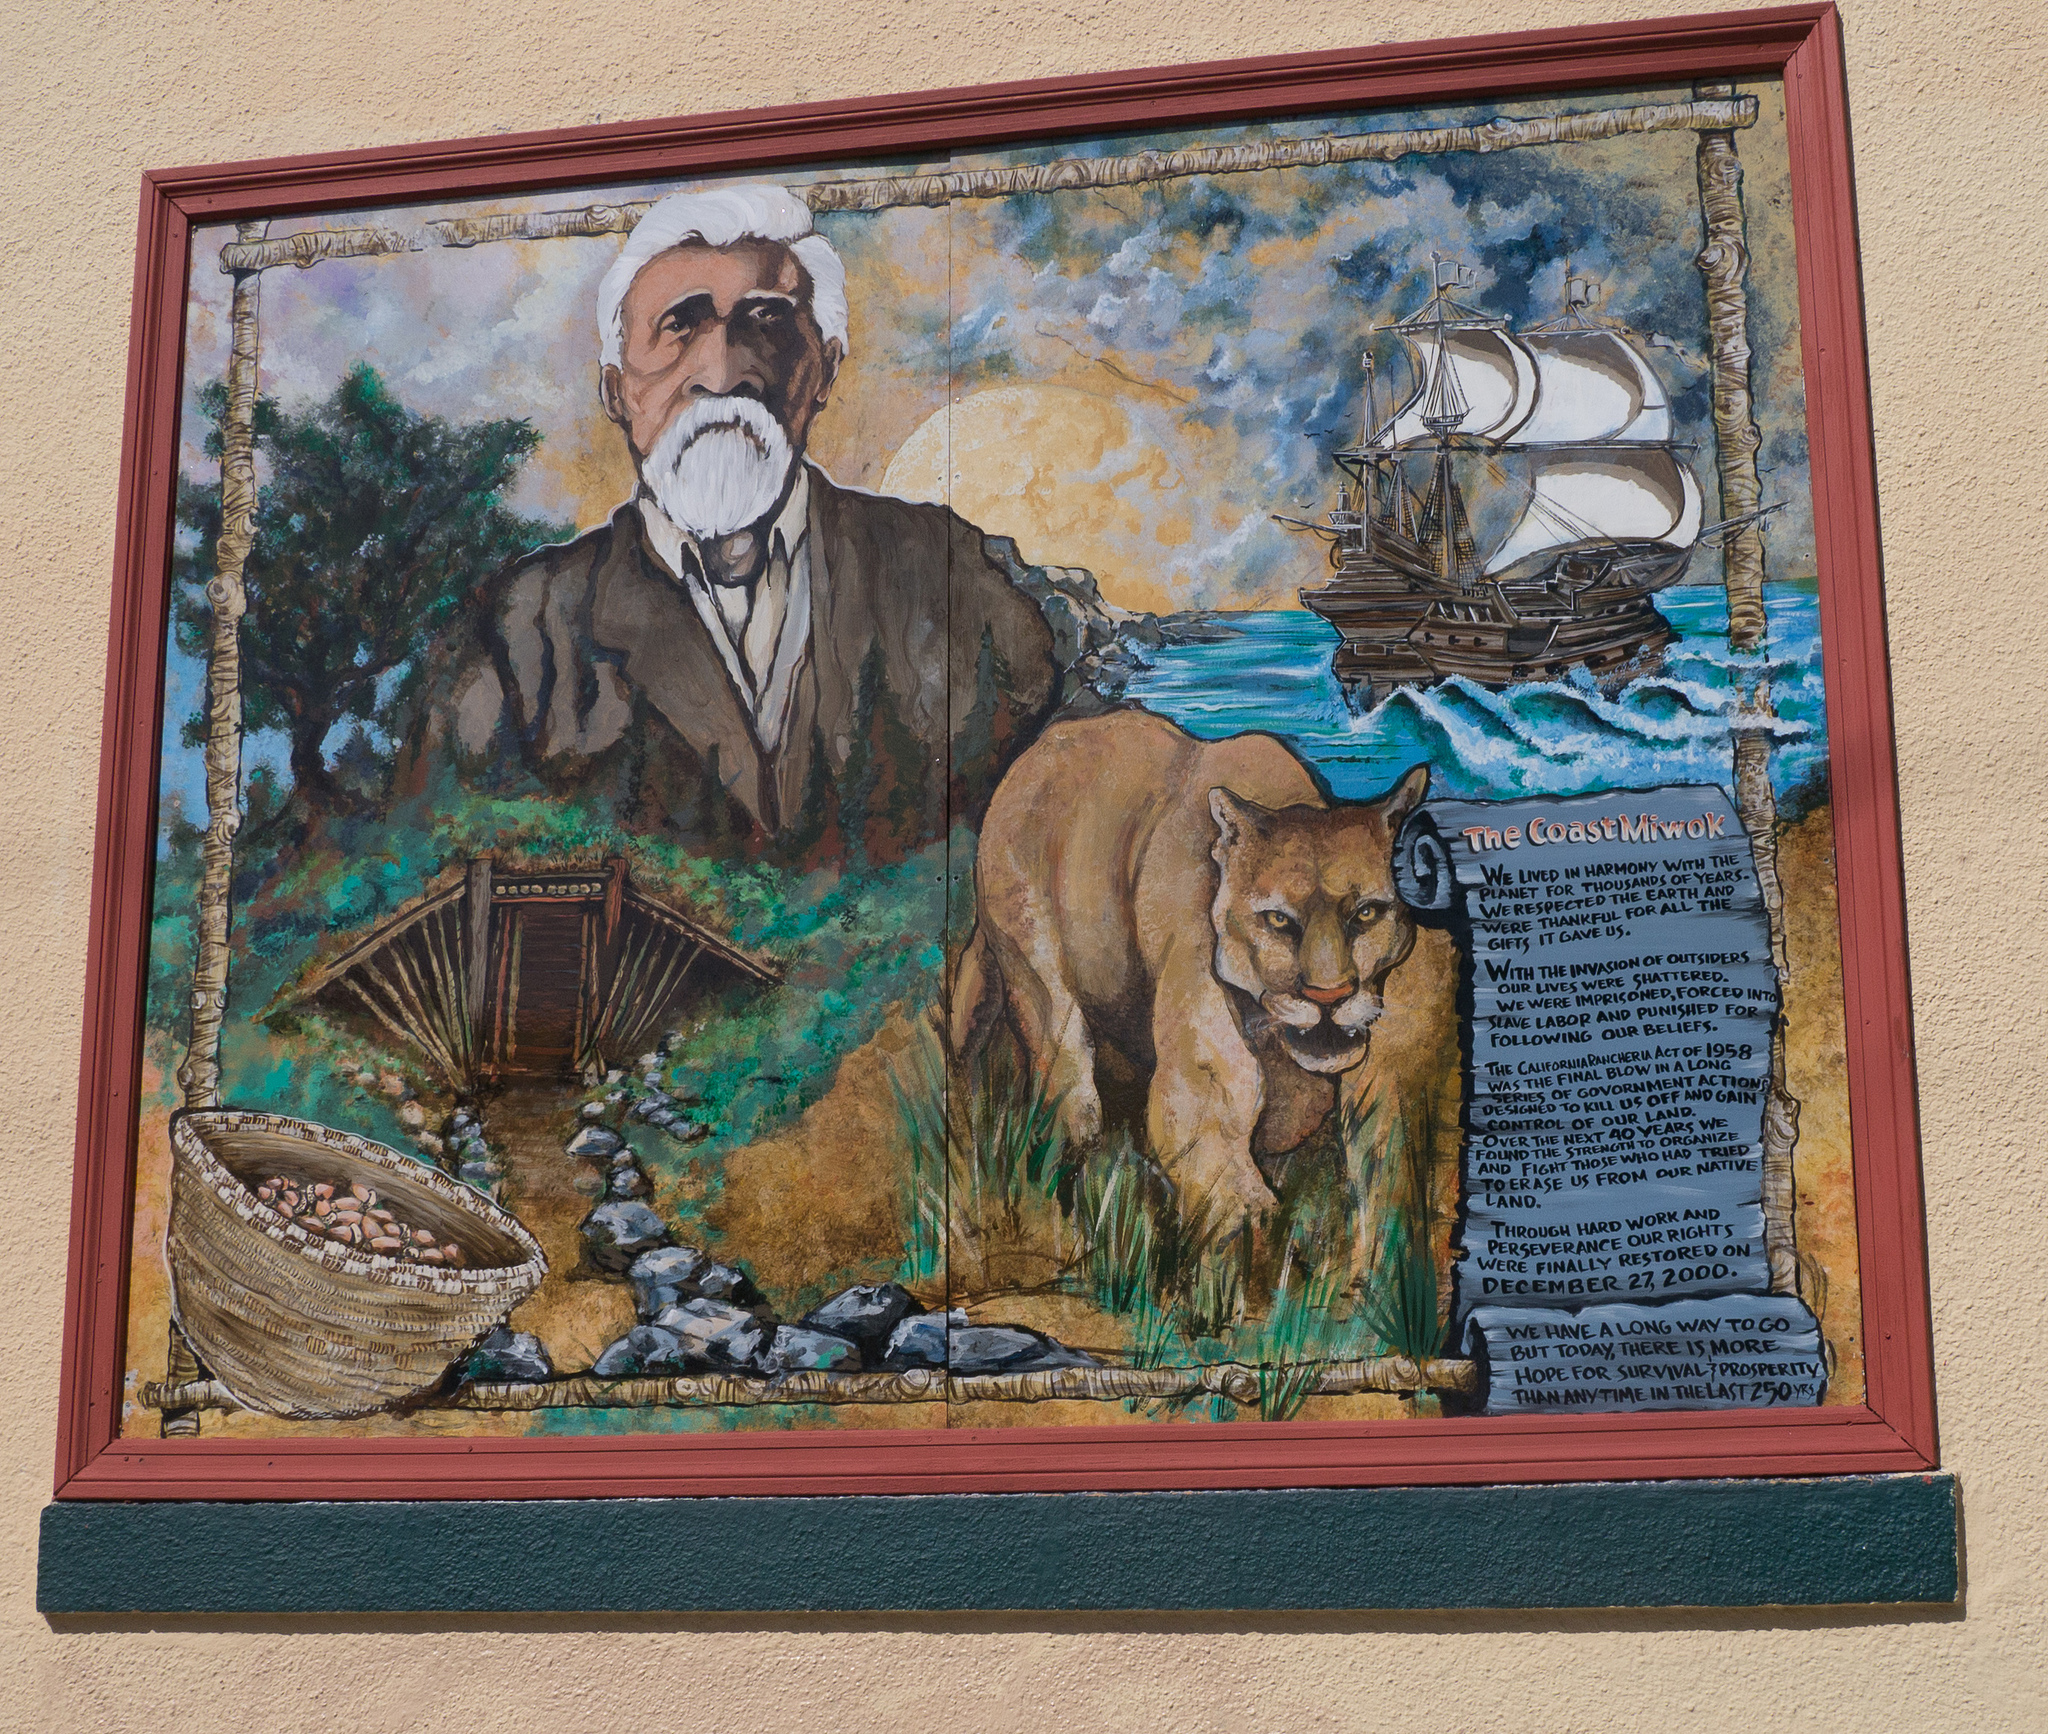 Mural: Miwok Coast, Photo by Jay Galvin